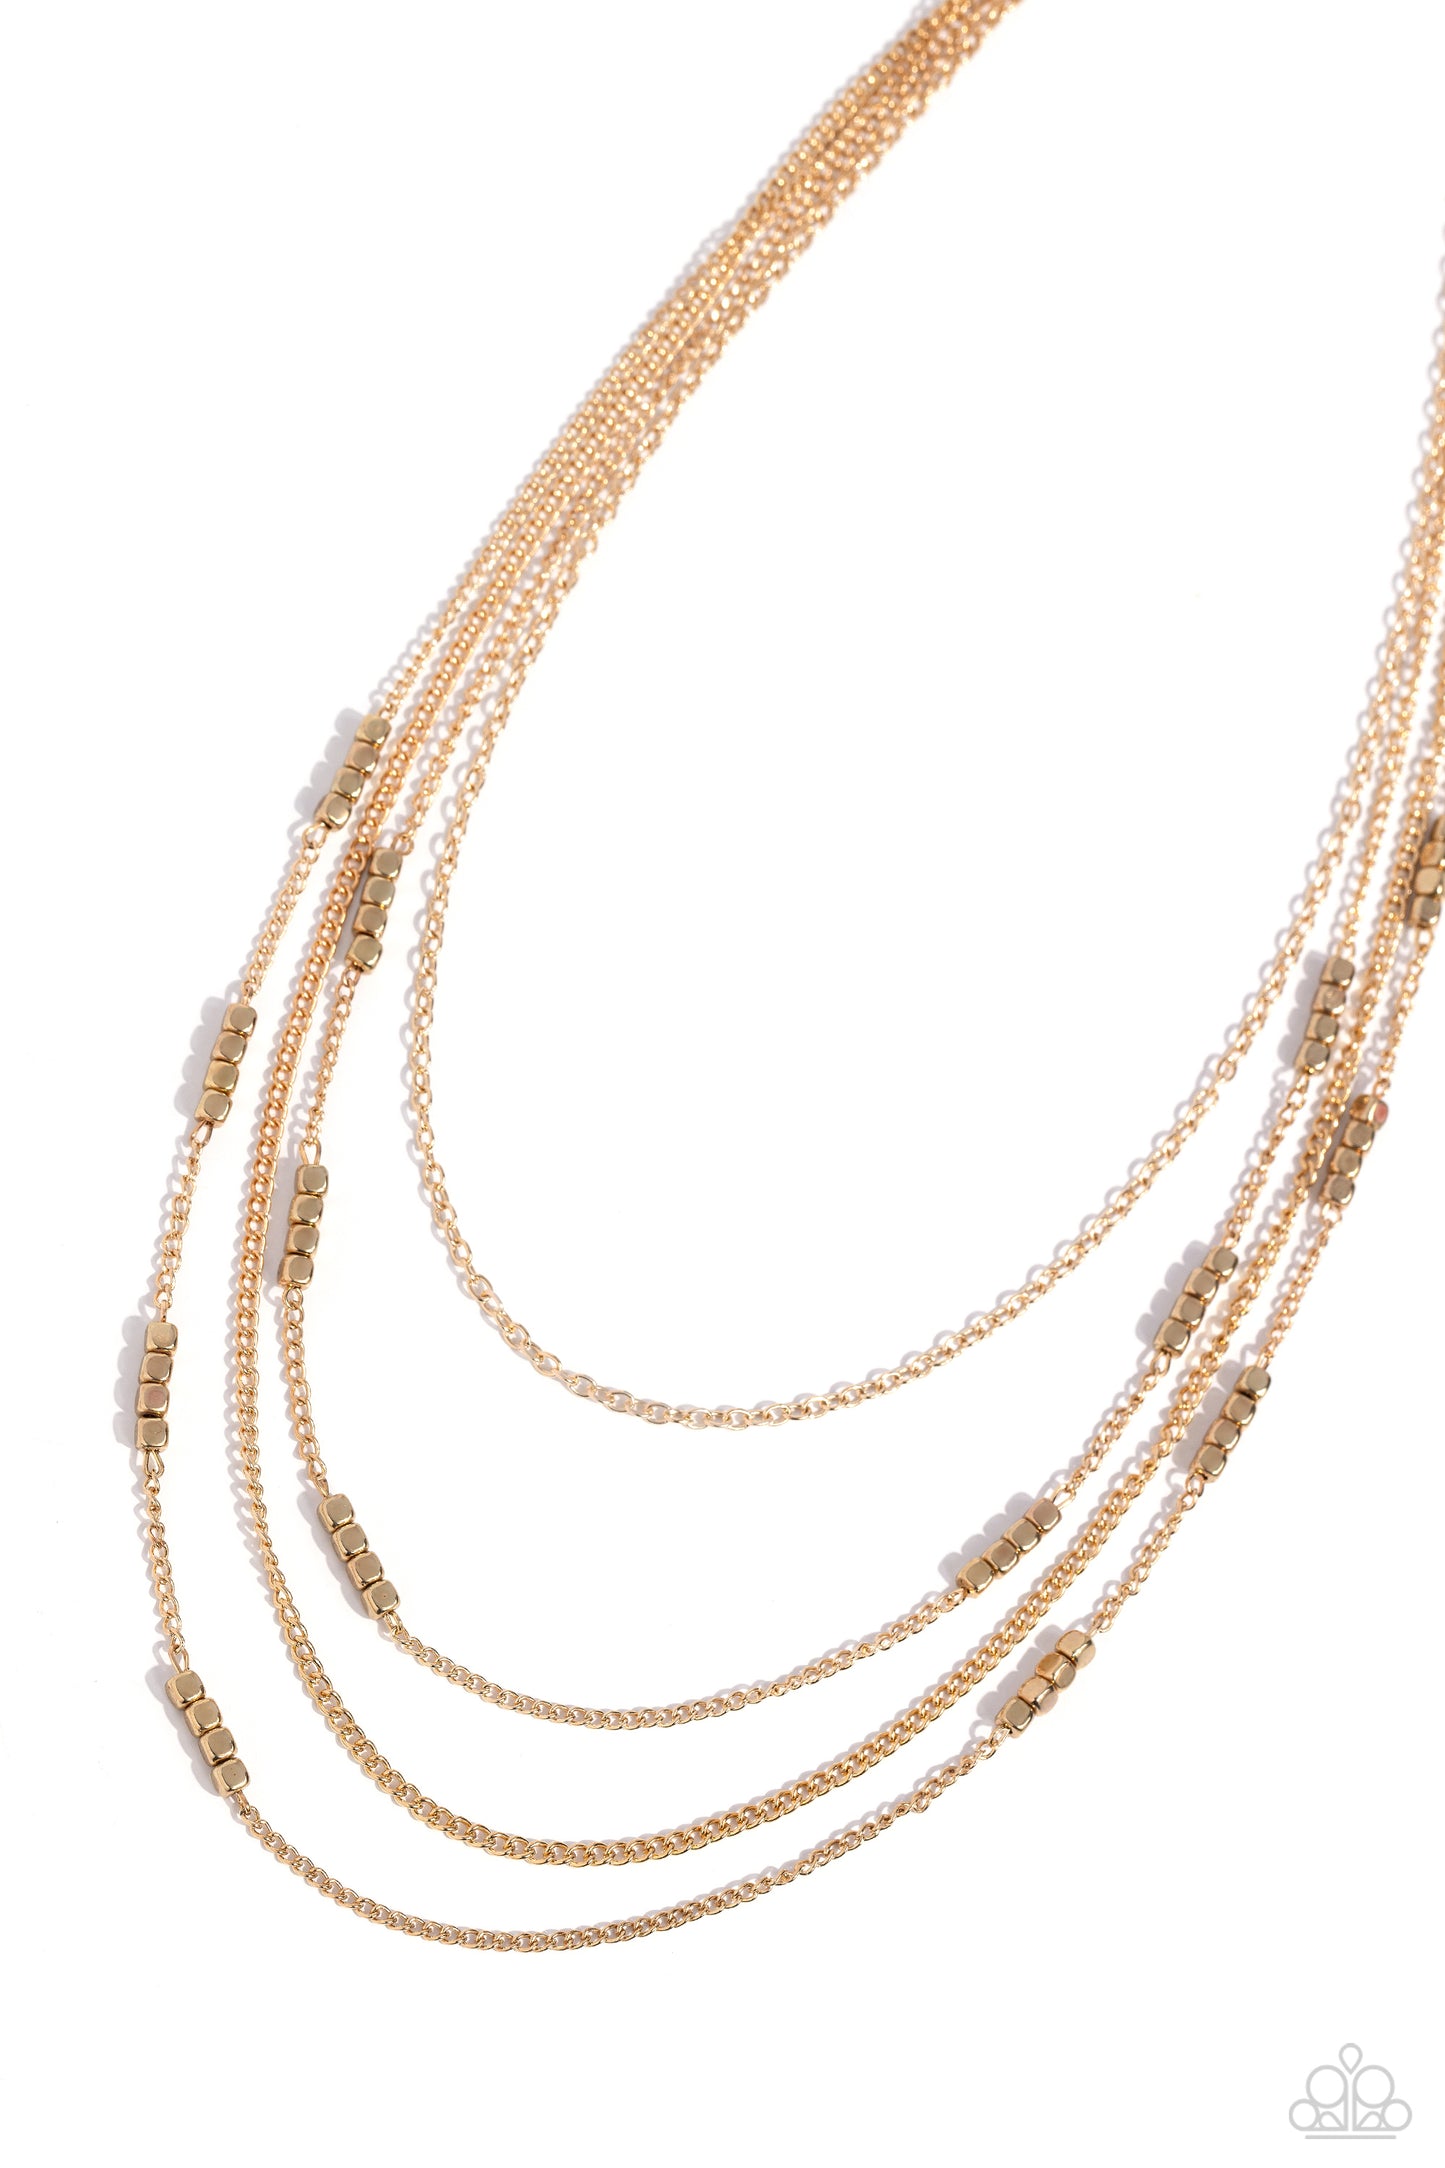 Glistening gold chains, sporadically infused with a quartet of gold beads link into fashionable layers below the neckline for a monochromatic medley. Features an adjustable clasp closure.  Sold as one individual necklace. Includes one pair of matching earrings.